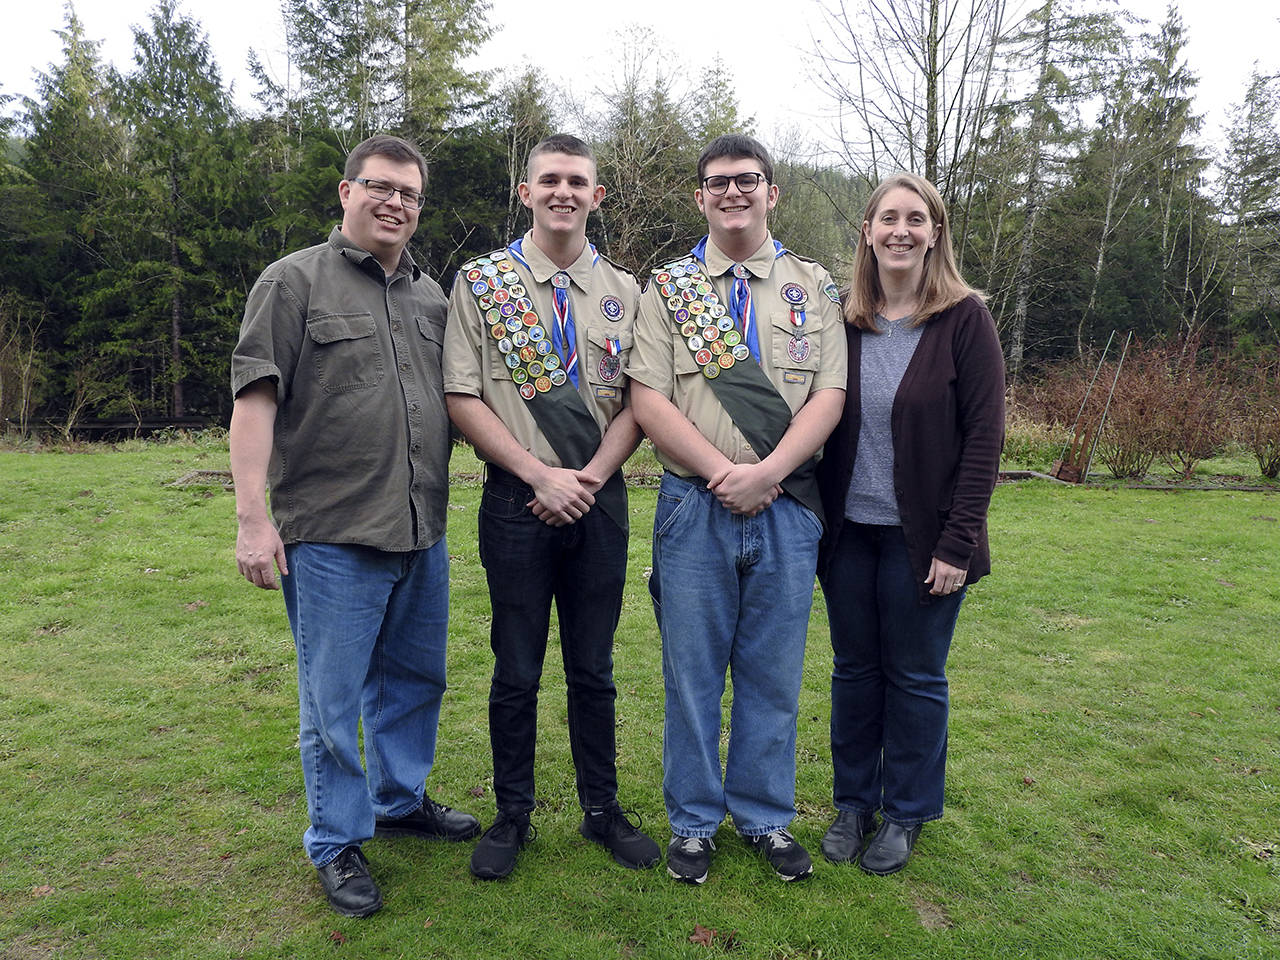 (Kat Bryant | Grays Harbor News Group) The Werners, from left: Mike, Evan, Andrew and Jill.